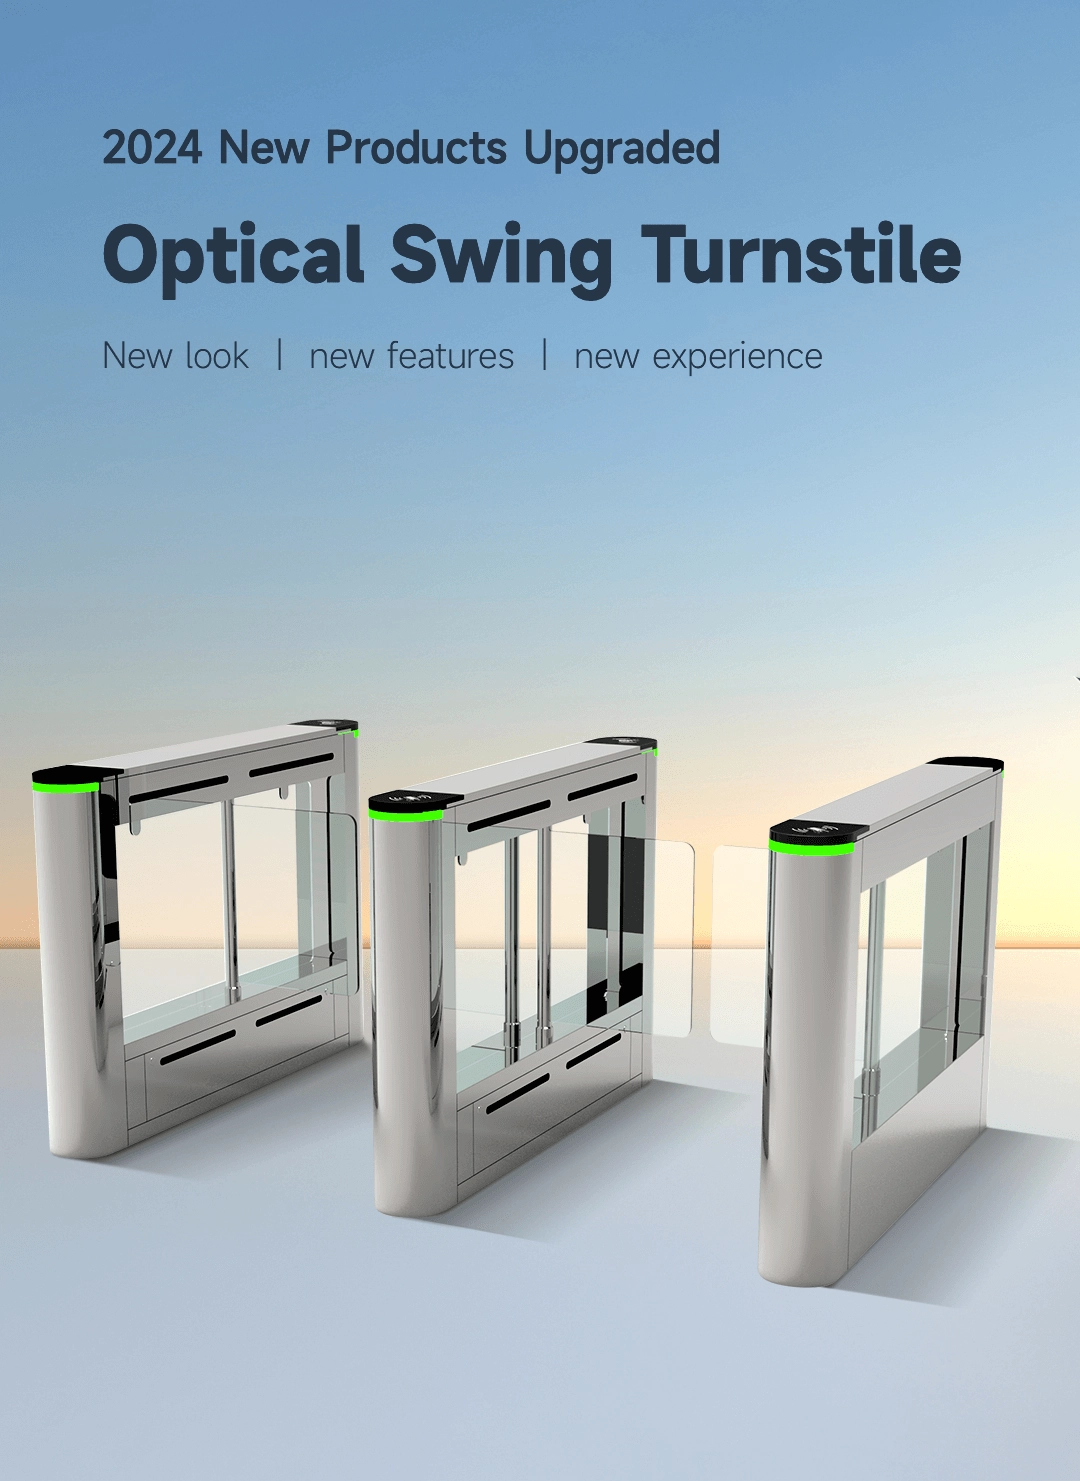 Tripod Turnstile 2024 New Products Upgraded